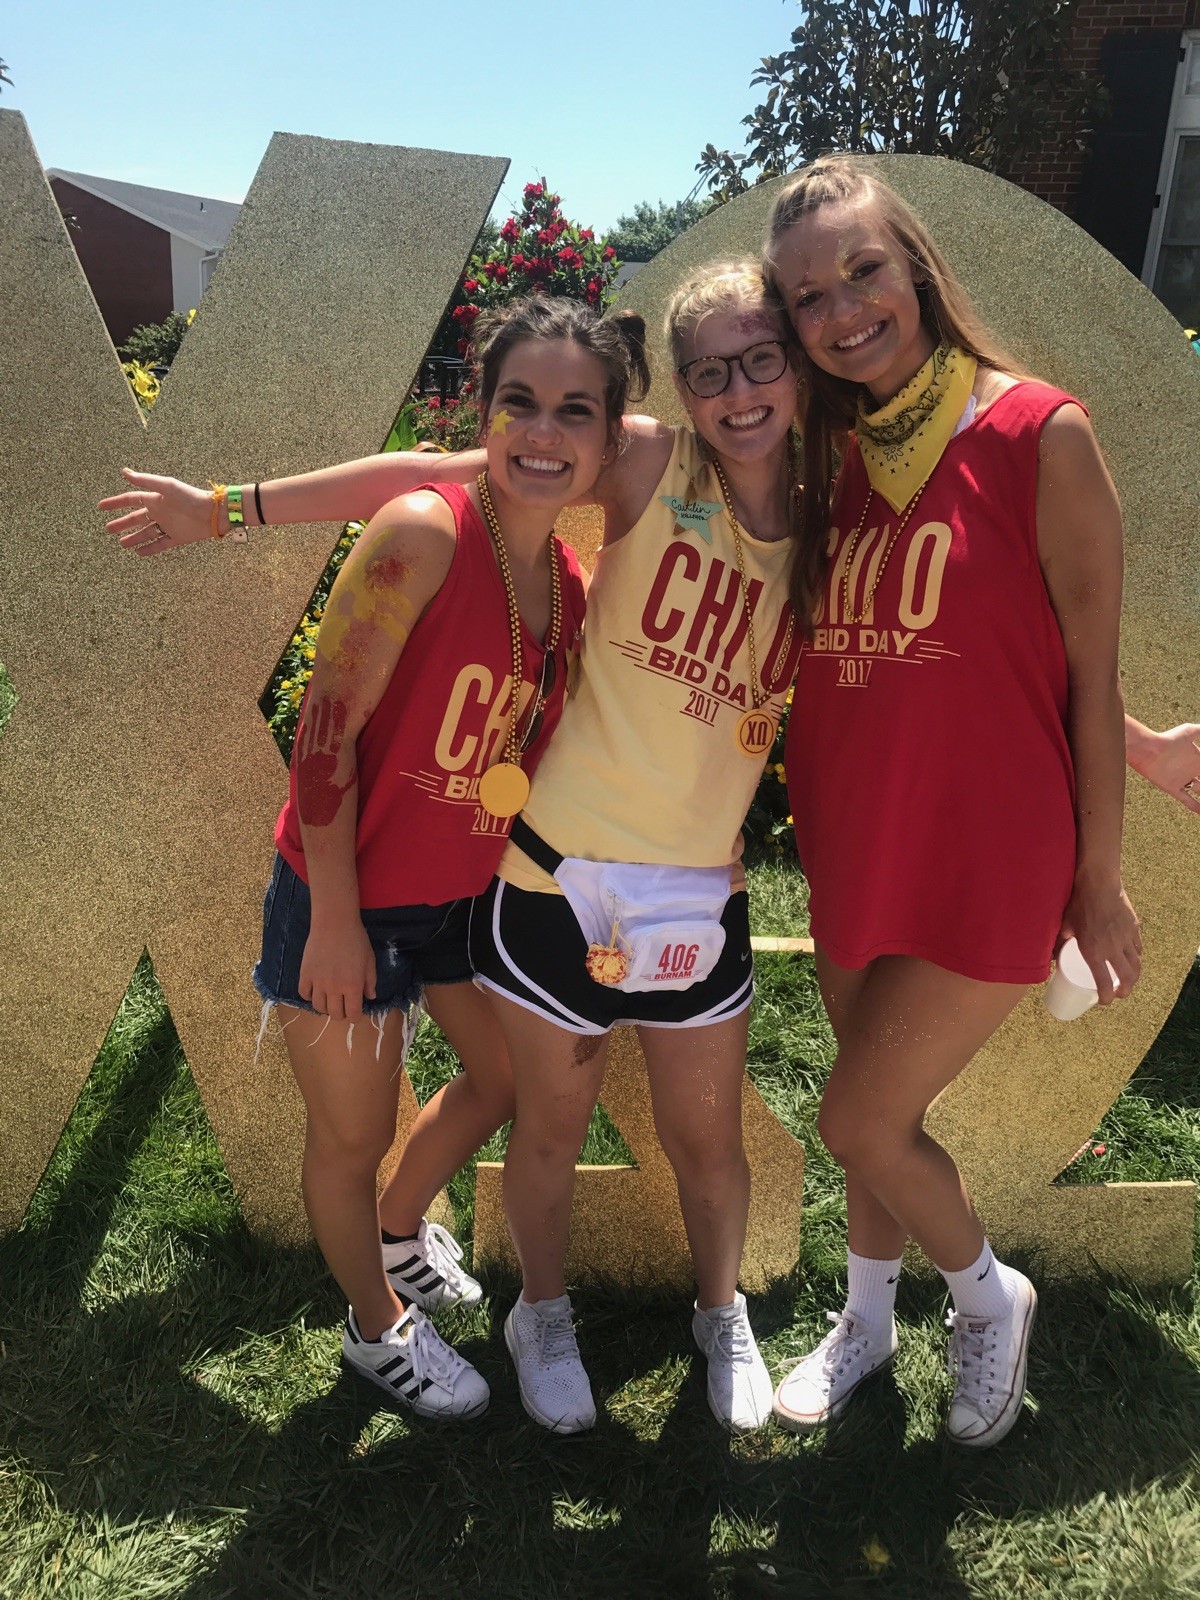 Caitlin and friends at sorority bid day